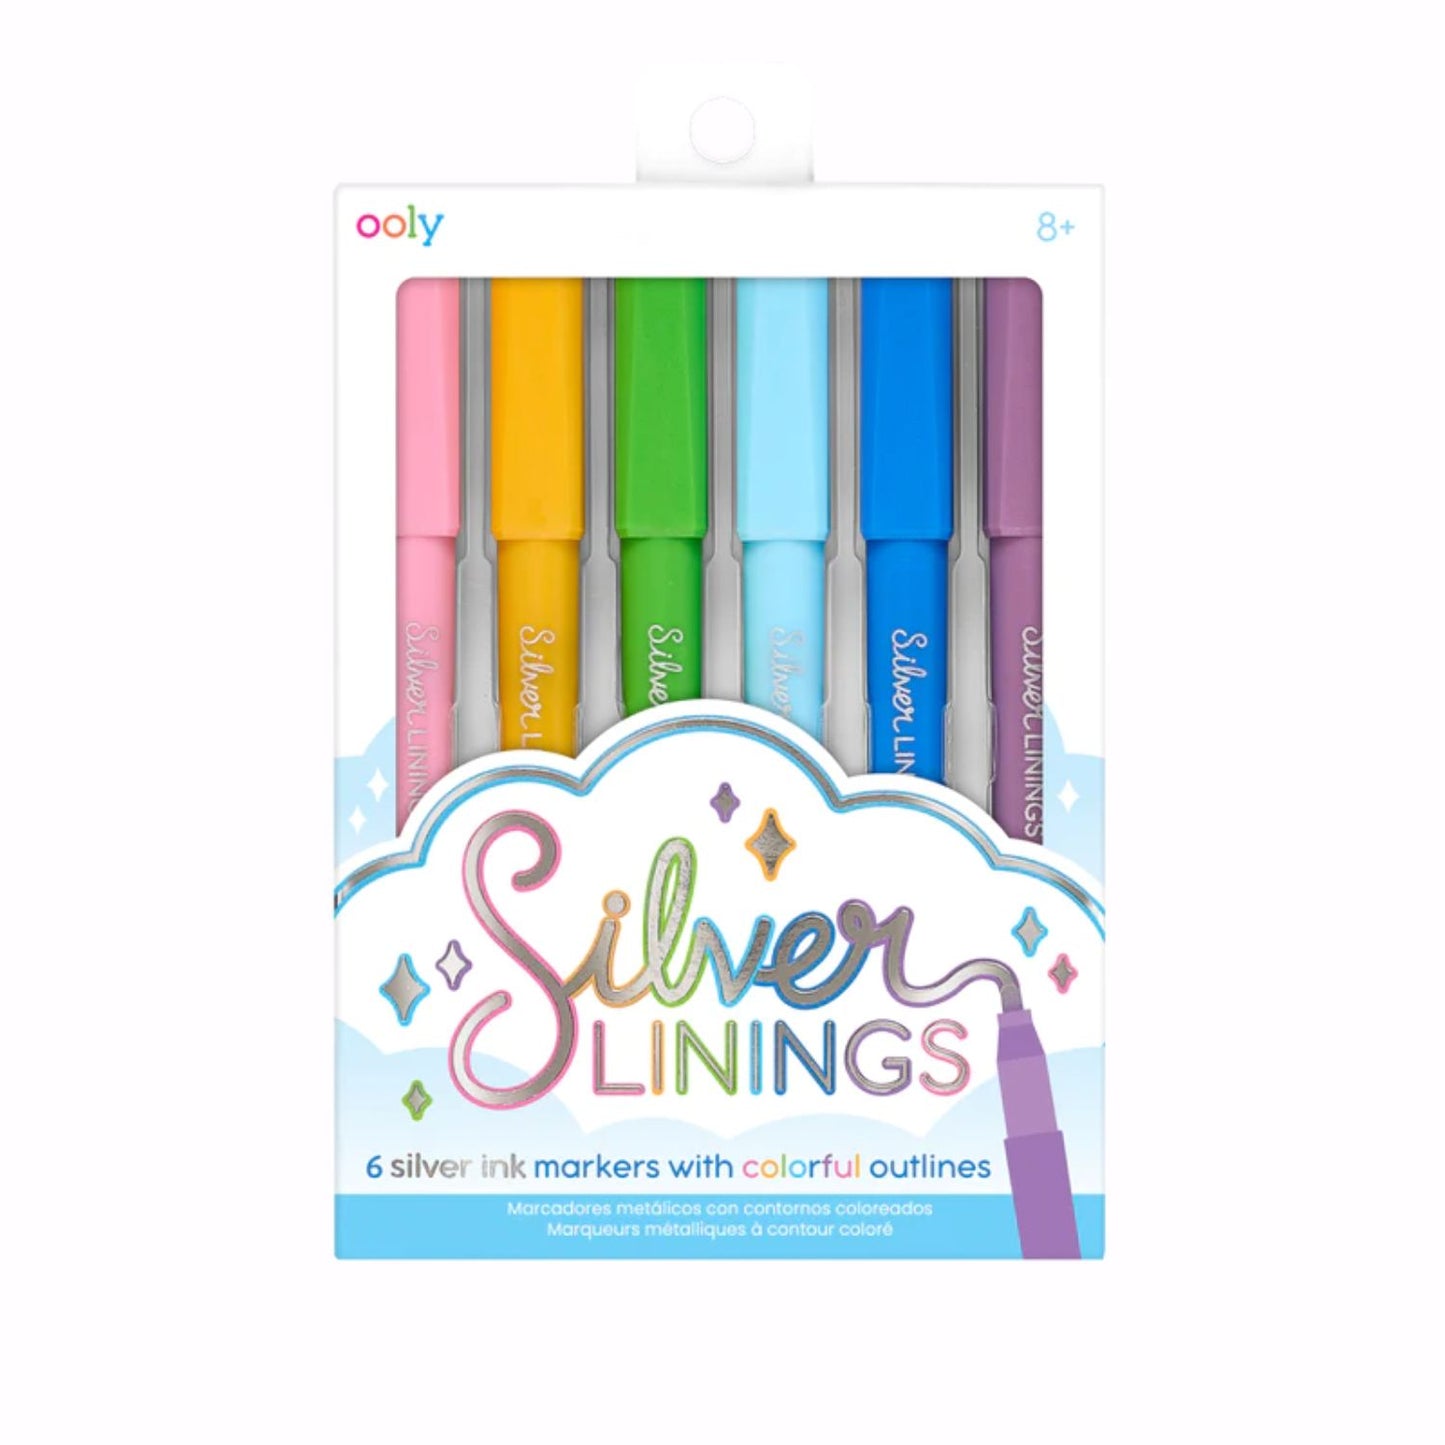 OOLY Silver Linings Outline Markers - Set of 6